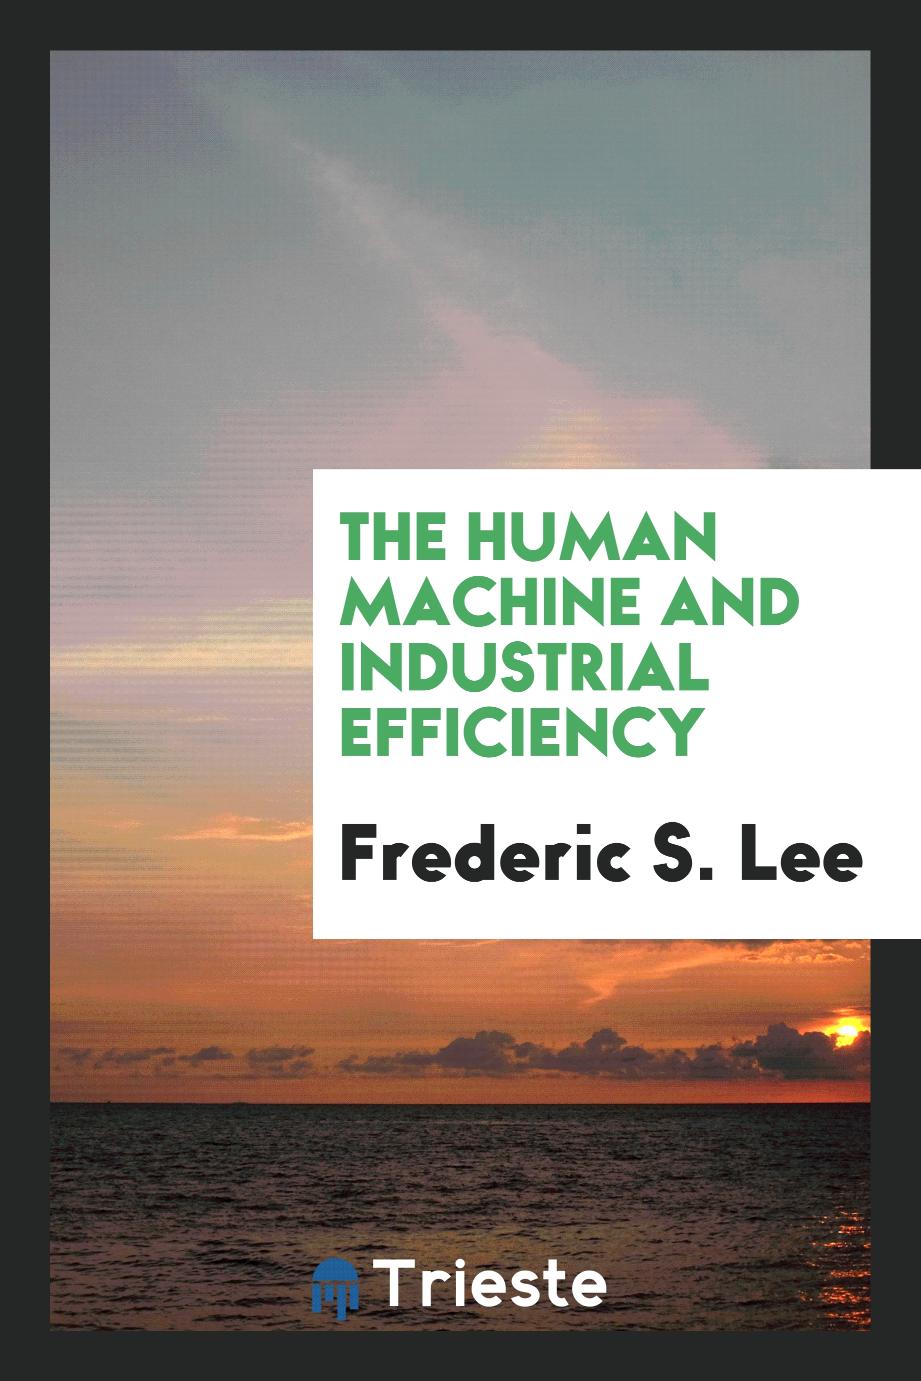 The Human Machine and Industrial Efficiency